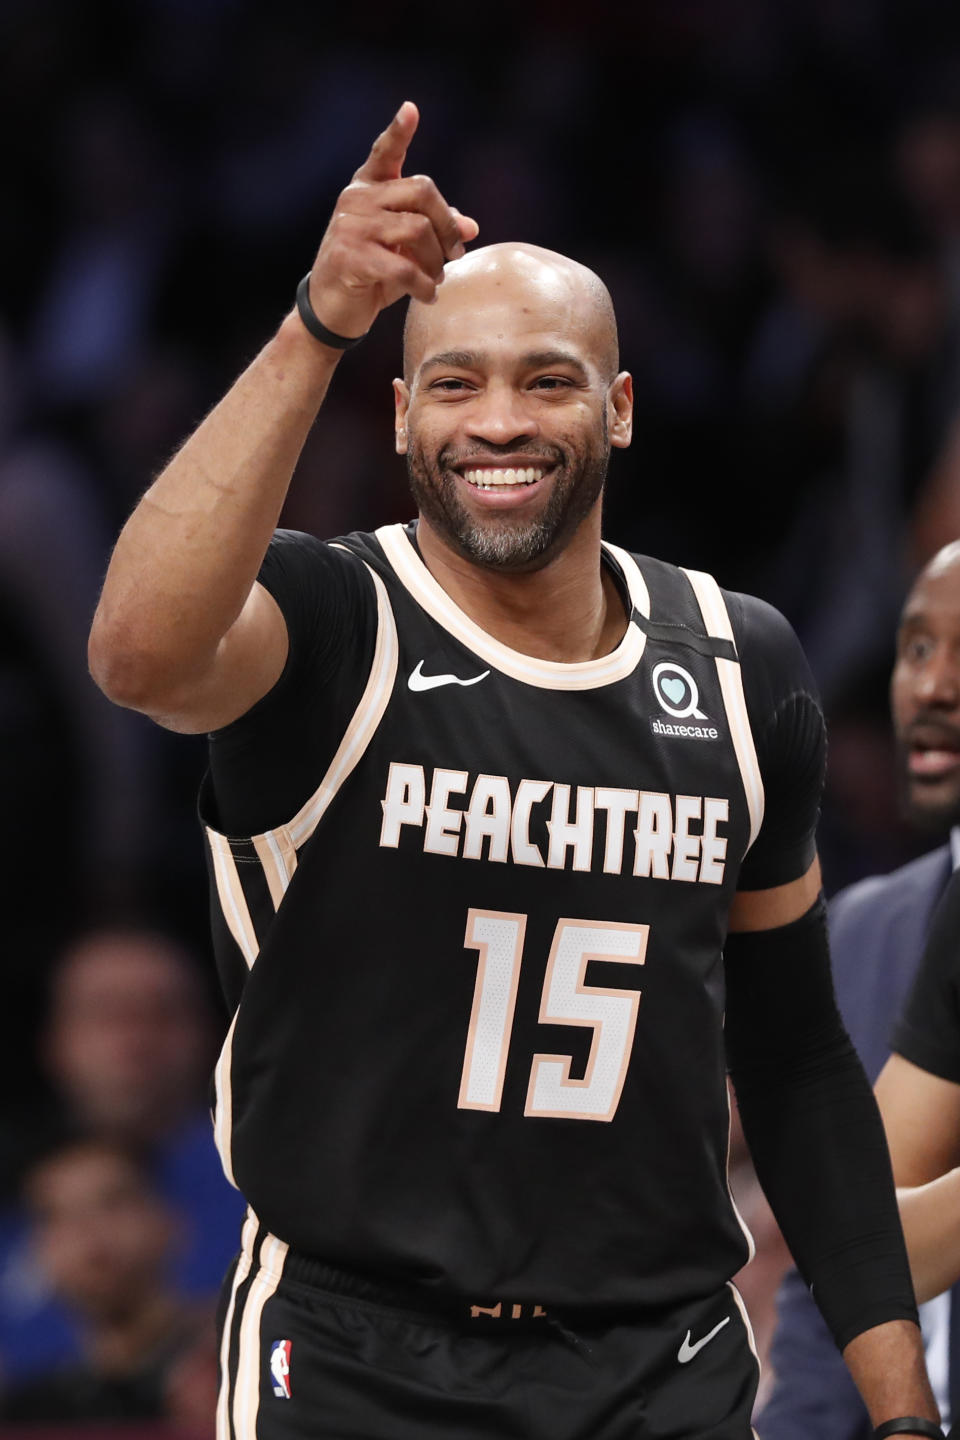 Atlanta Hawks guard Vince Carter (15) reacts as the crowd cheers his second appearance on the court during the first half of an NBA basketball game against the Brooklyn Nets, Sunday, Jan. 12, 2020, in New York. (AP Photo/Kathy Willens)